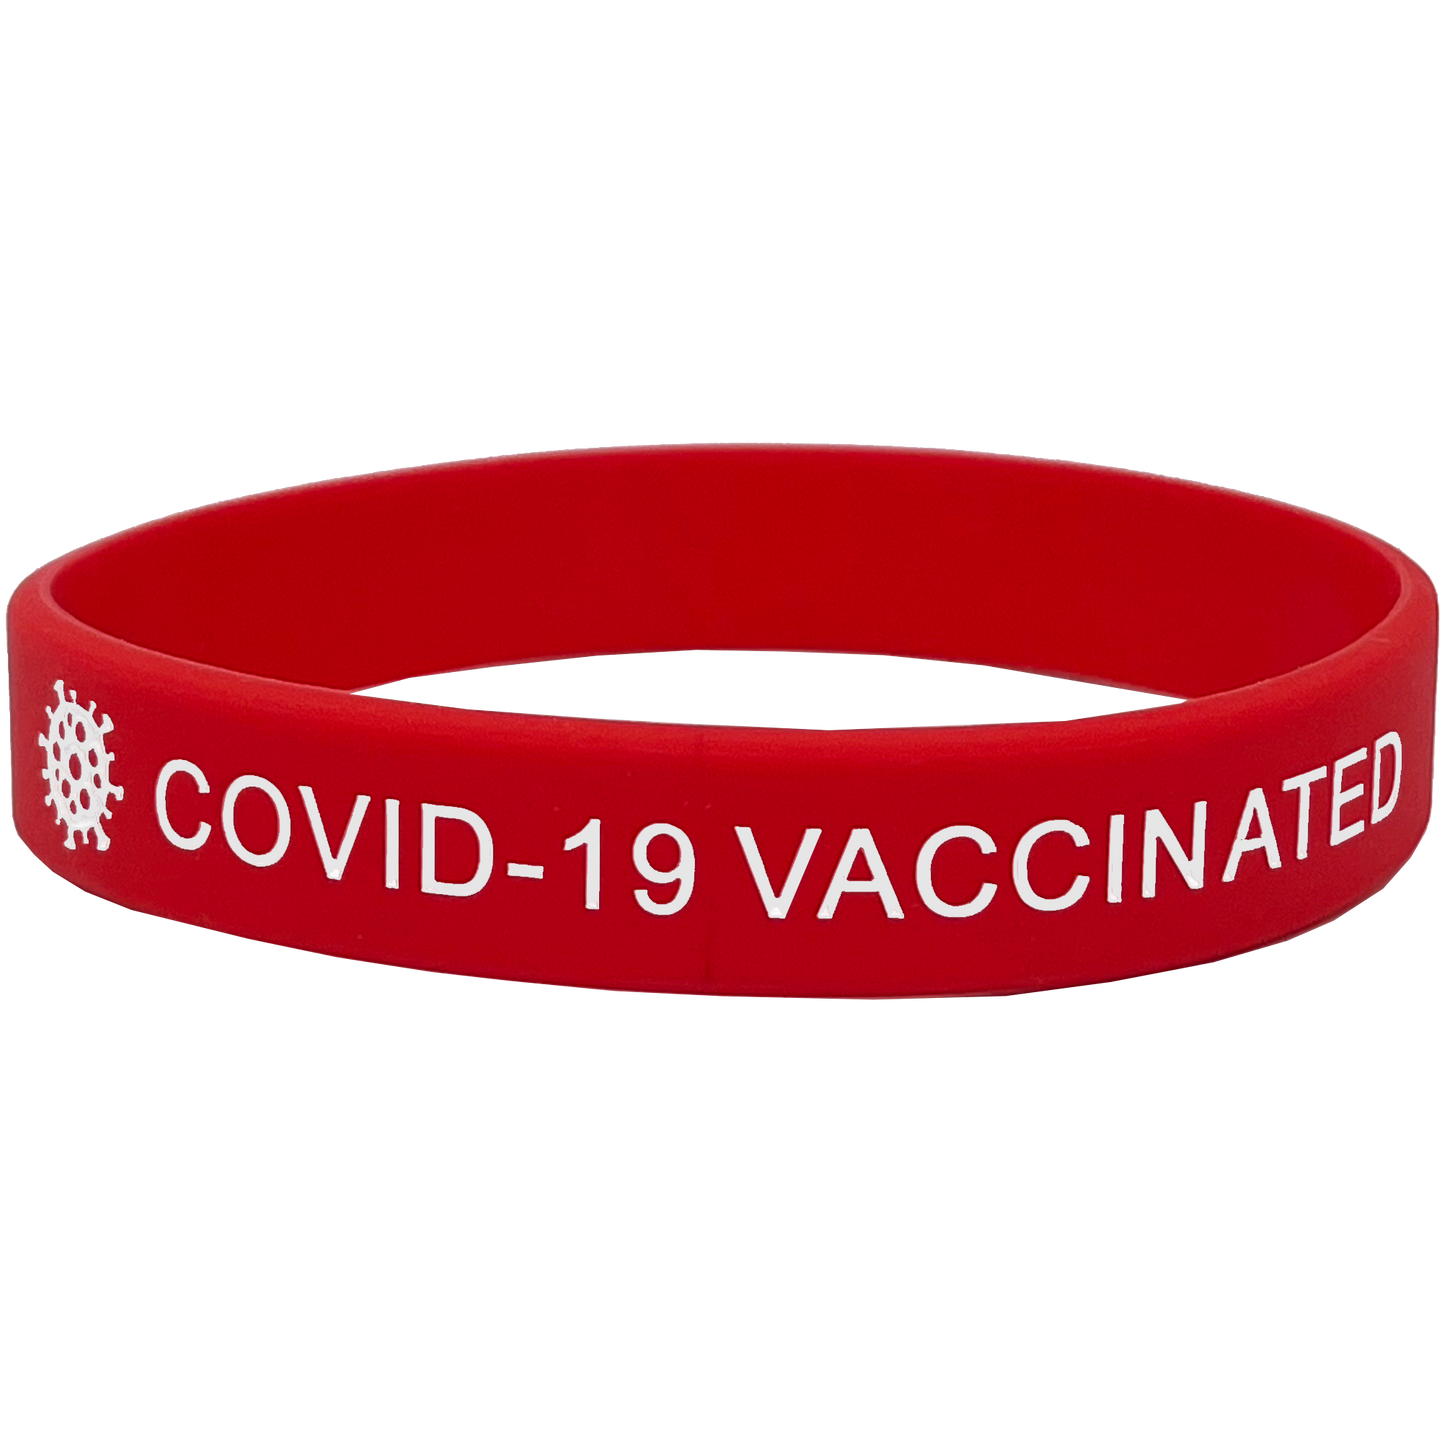 BL3-010 Vaccinated Silicon Rubber Bracelet Hospital Pandemic Covid-19 ICU RN LPN BSN ER POLICE